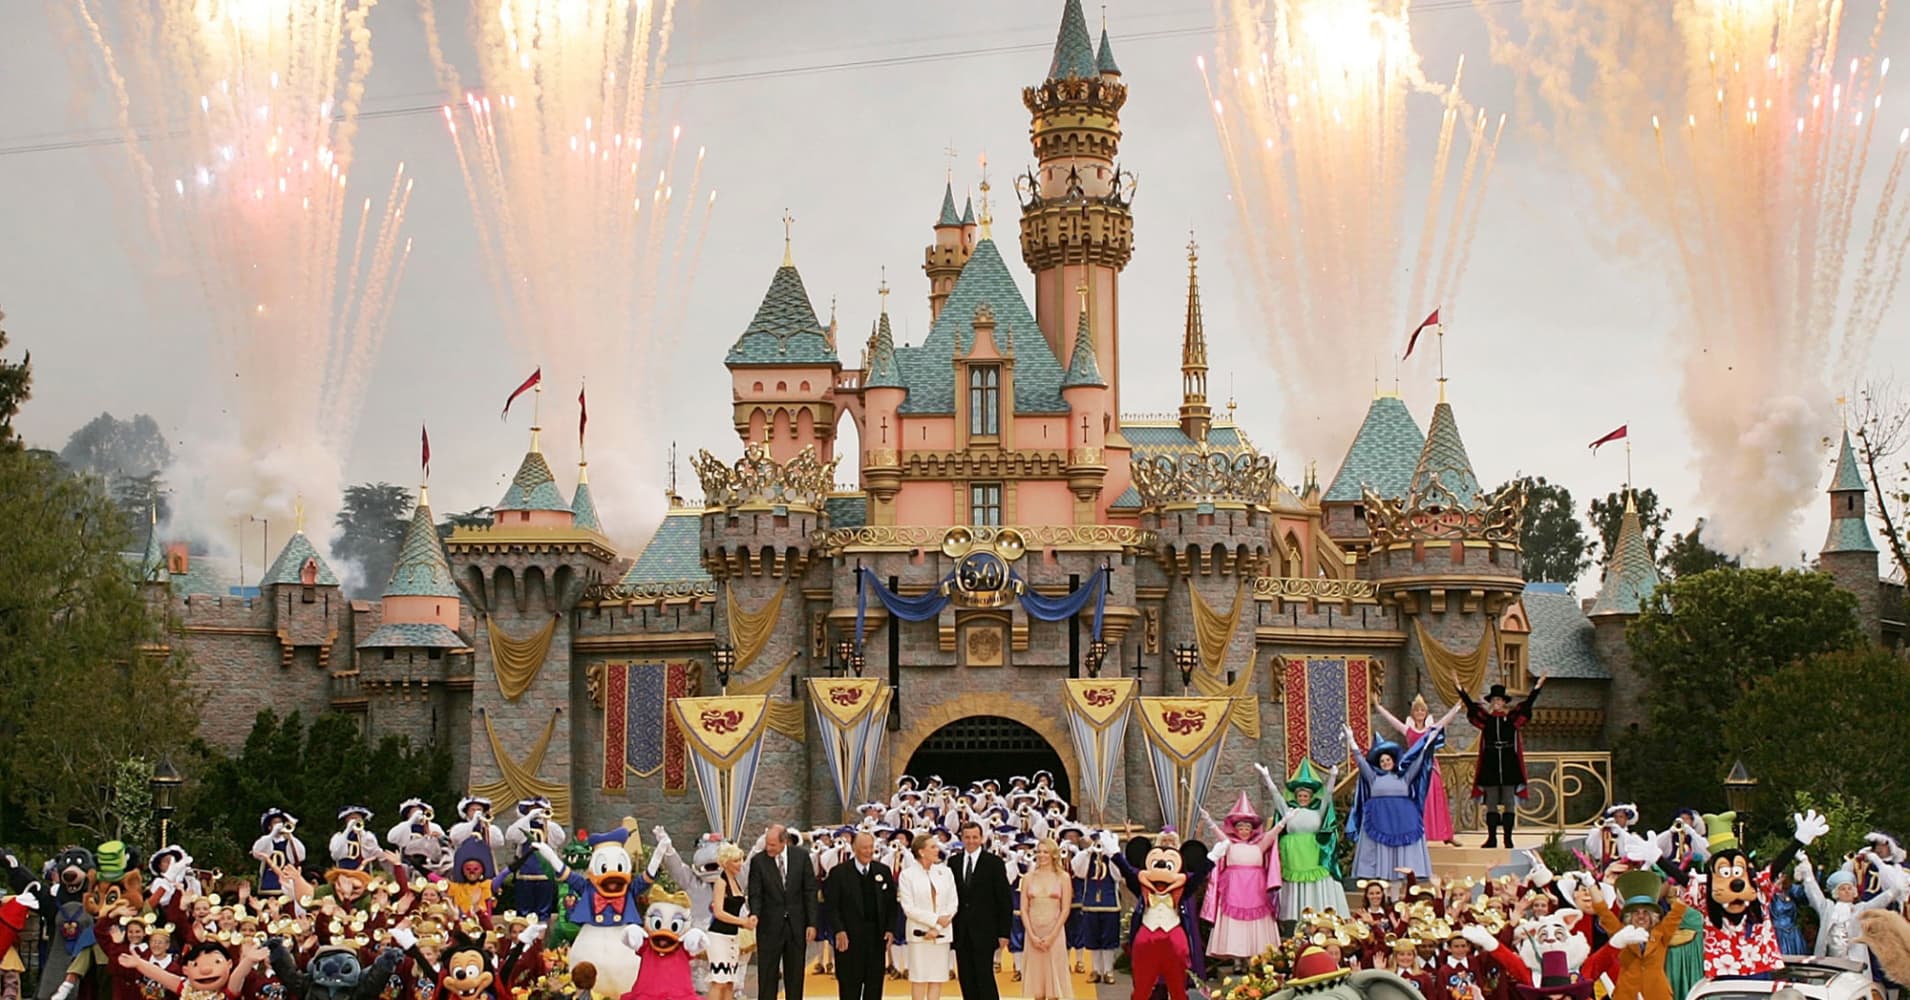 This is how much Disneyland cost when it opened